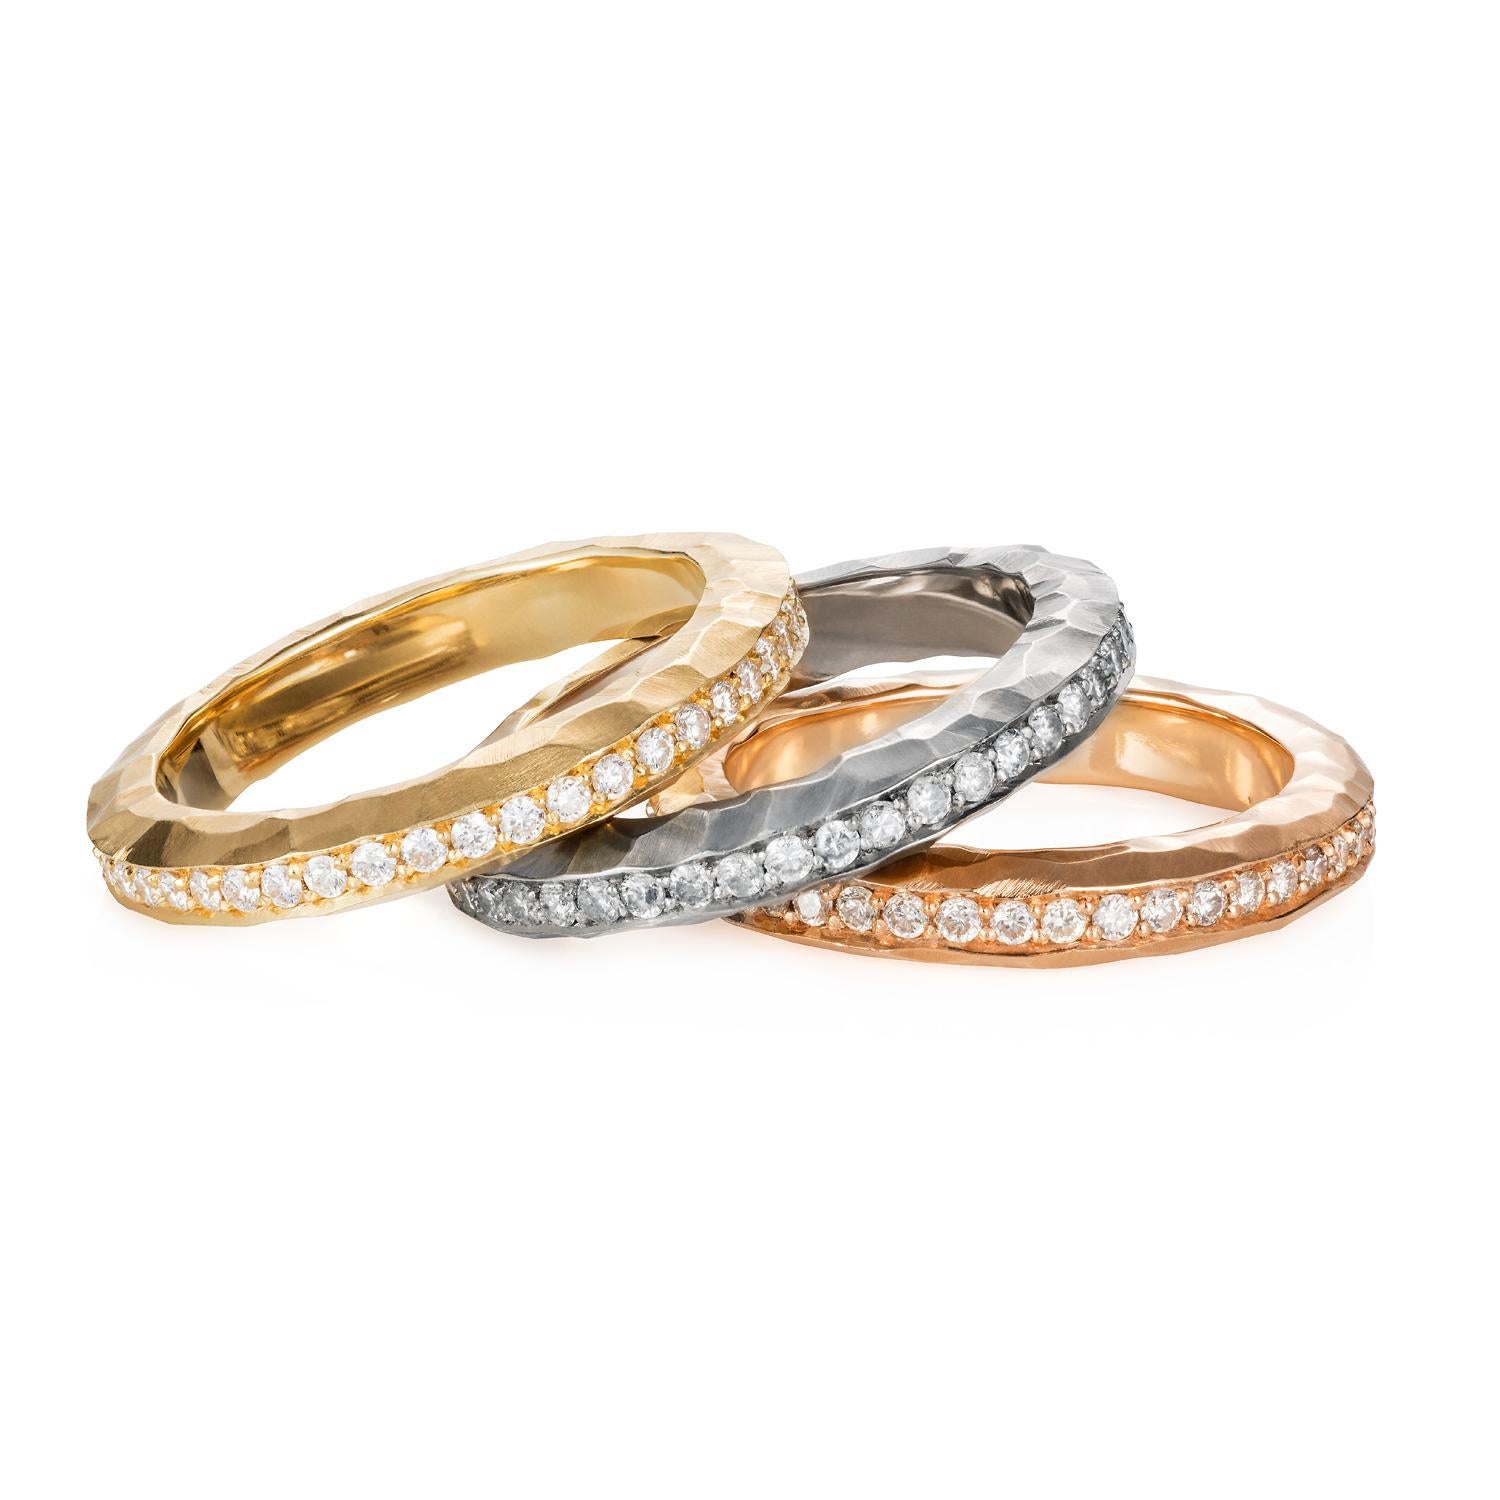 This Sweet Pea 18k hammered brushed rose gold eternity band ring is set with champagne sparkling diamonds. The textured piece has a lovely weight and is truly stunning. The band is 3.5mm wide and the total diamond weight is 0.45ct. This ring is a UK